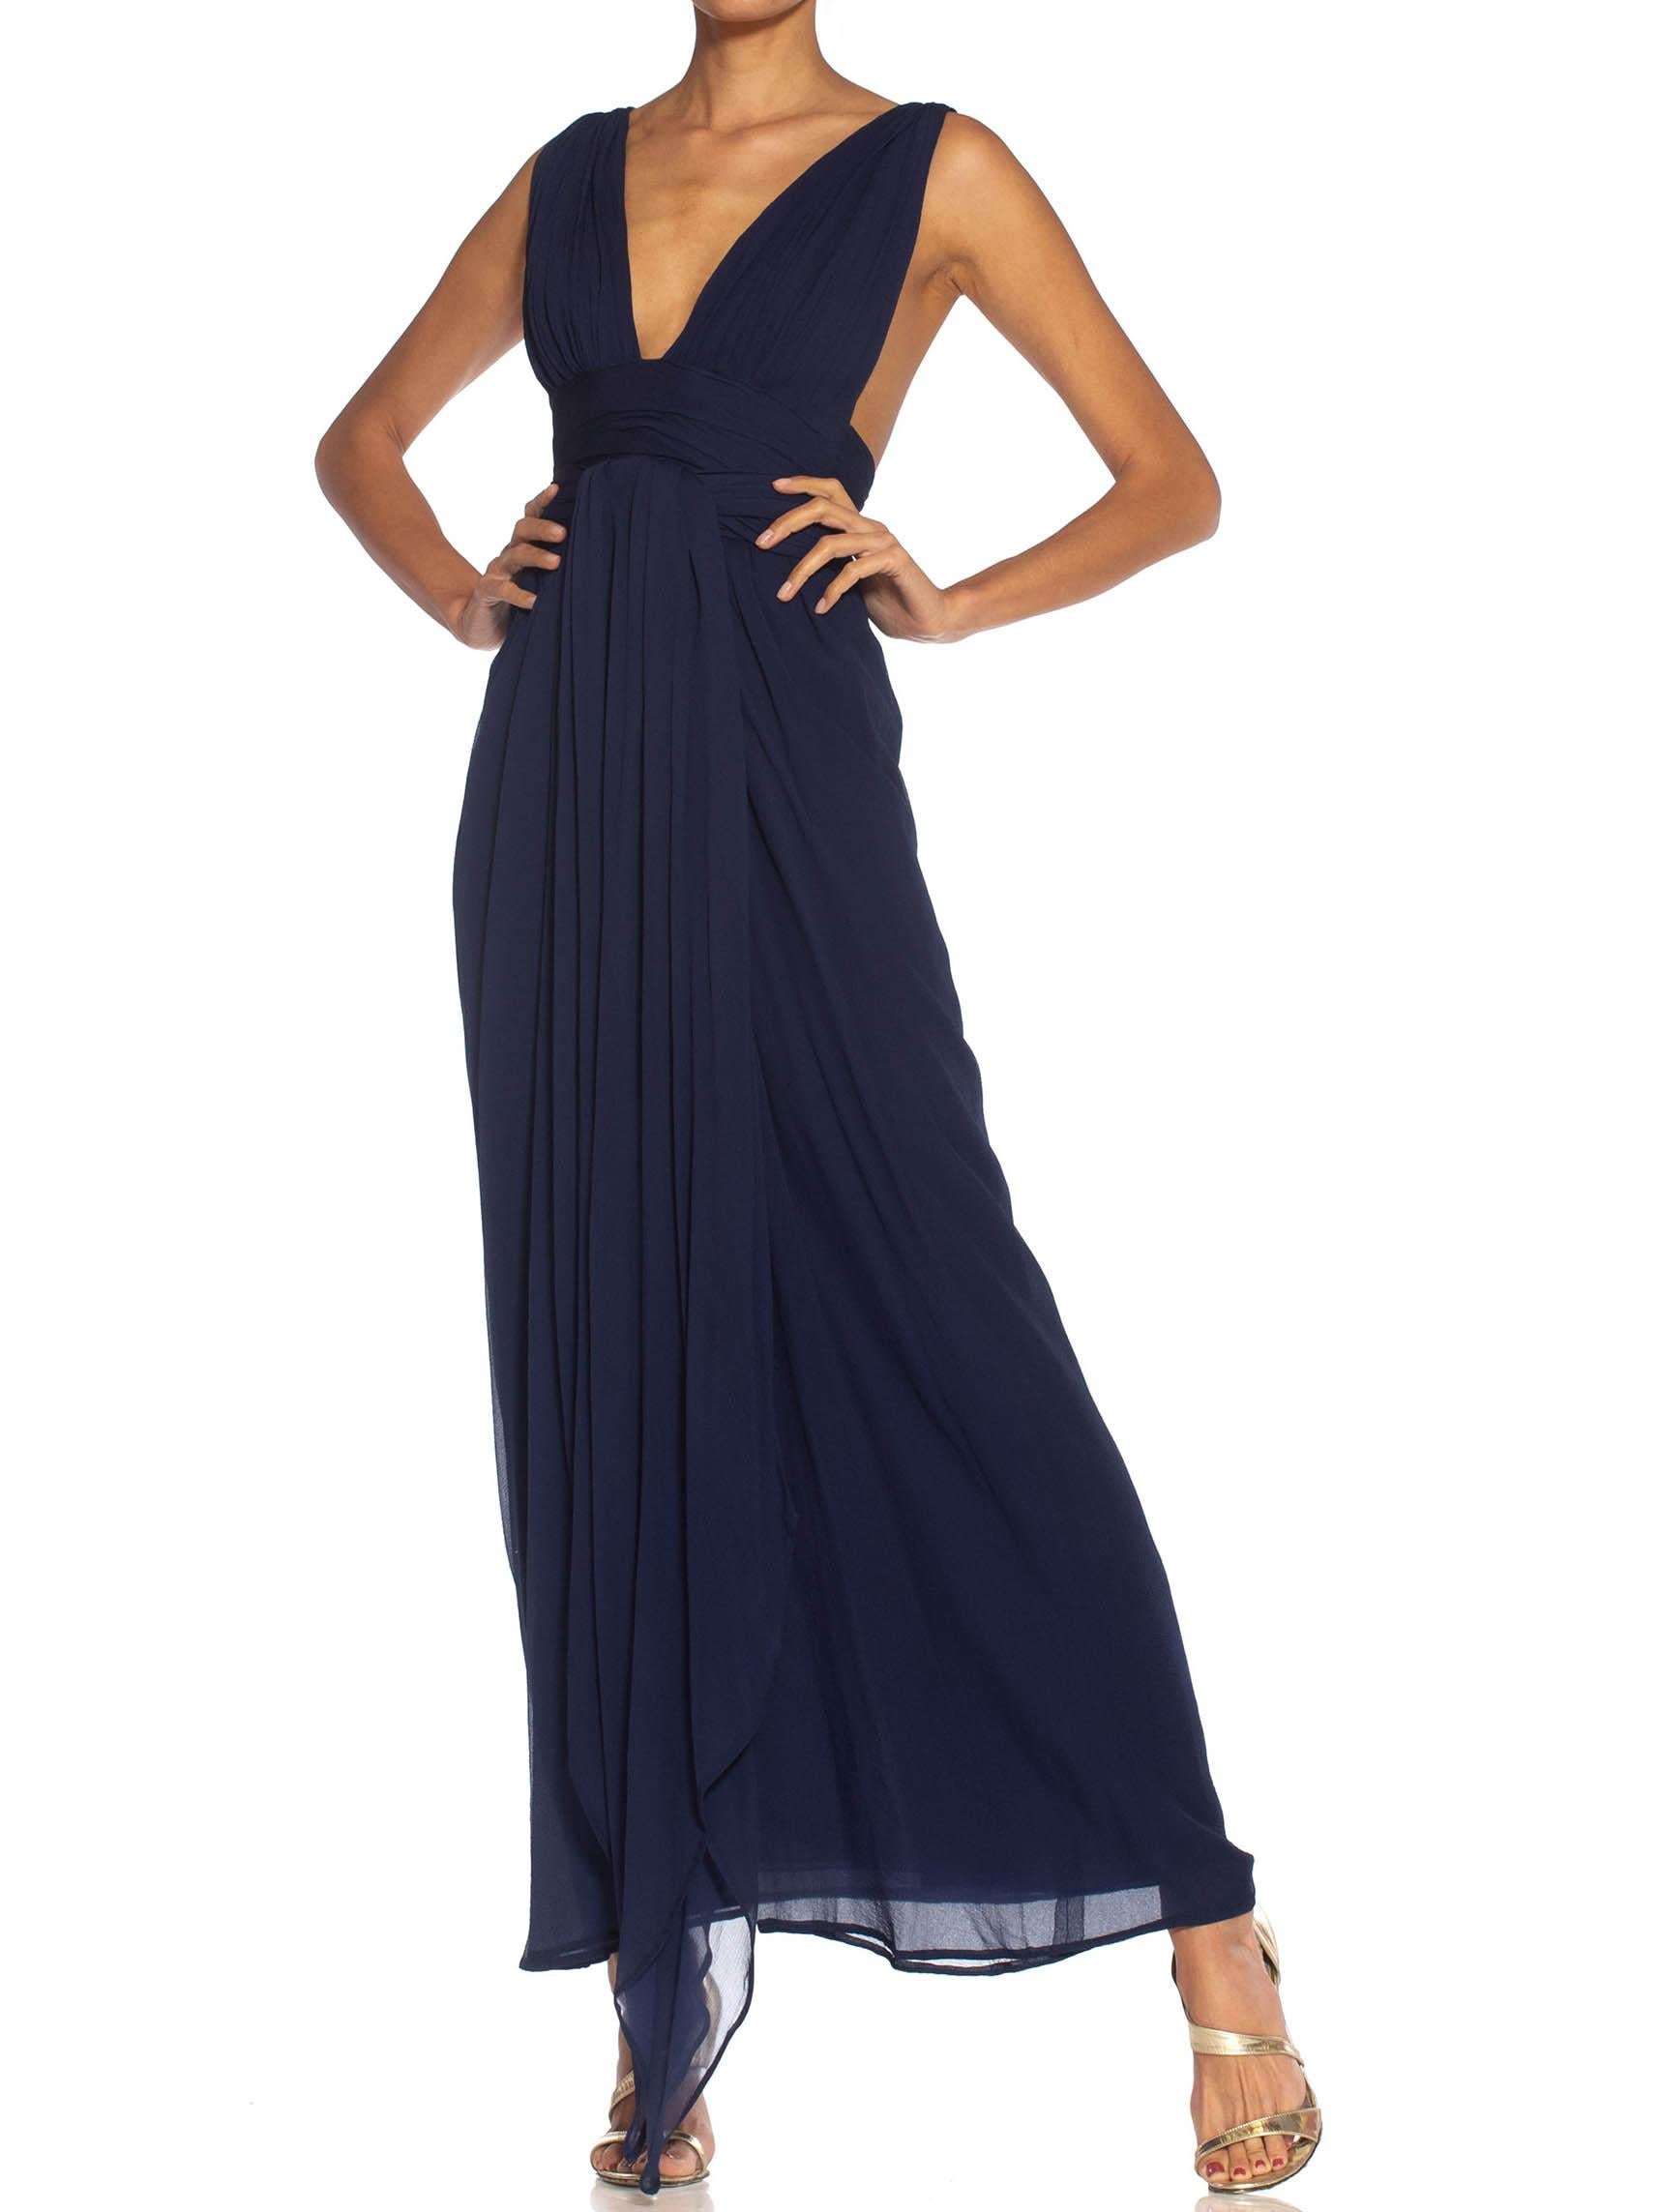 1980S GIVENCHY Navy Blue Haute Couture Silk Chiffon Low Cut Gown 1989 For Sale 2